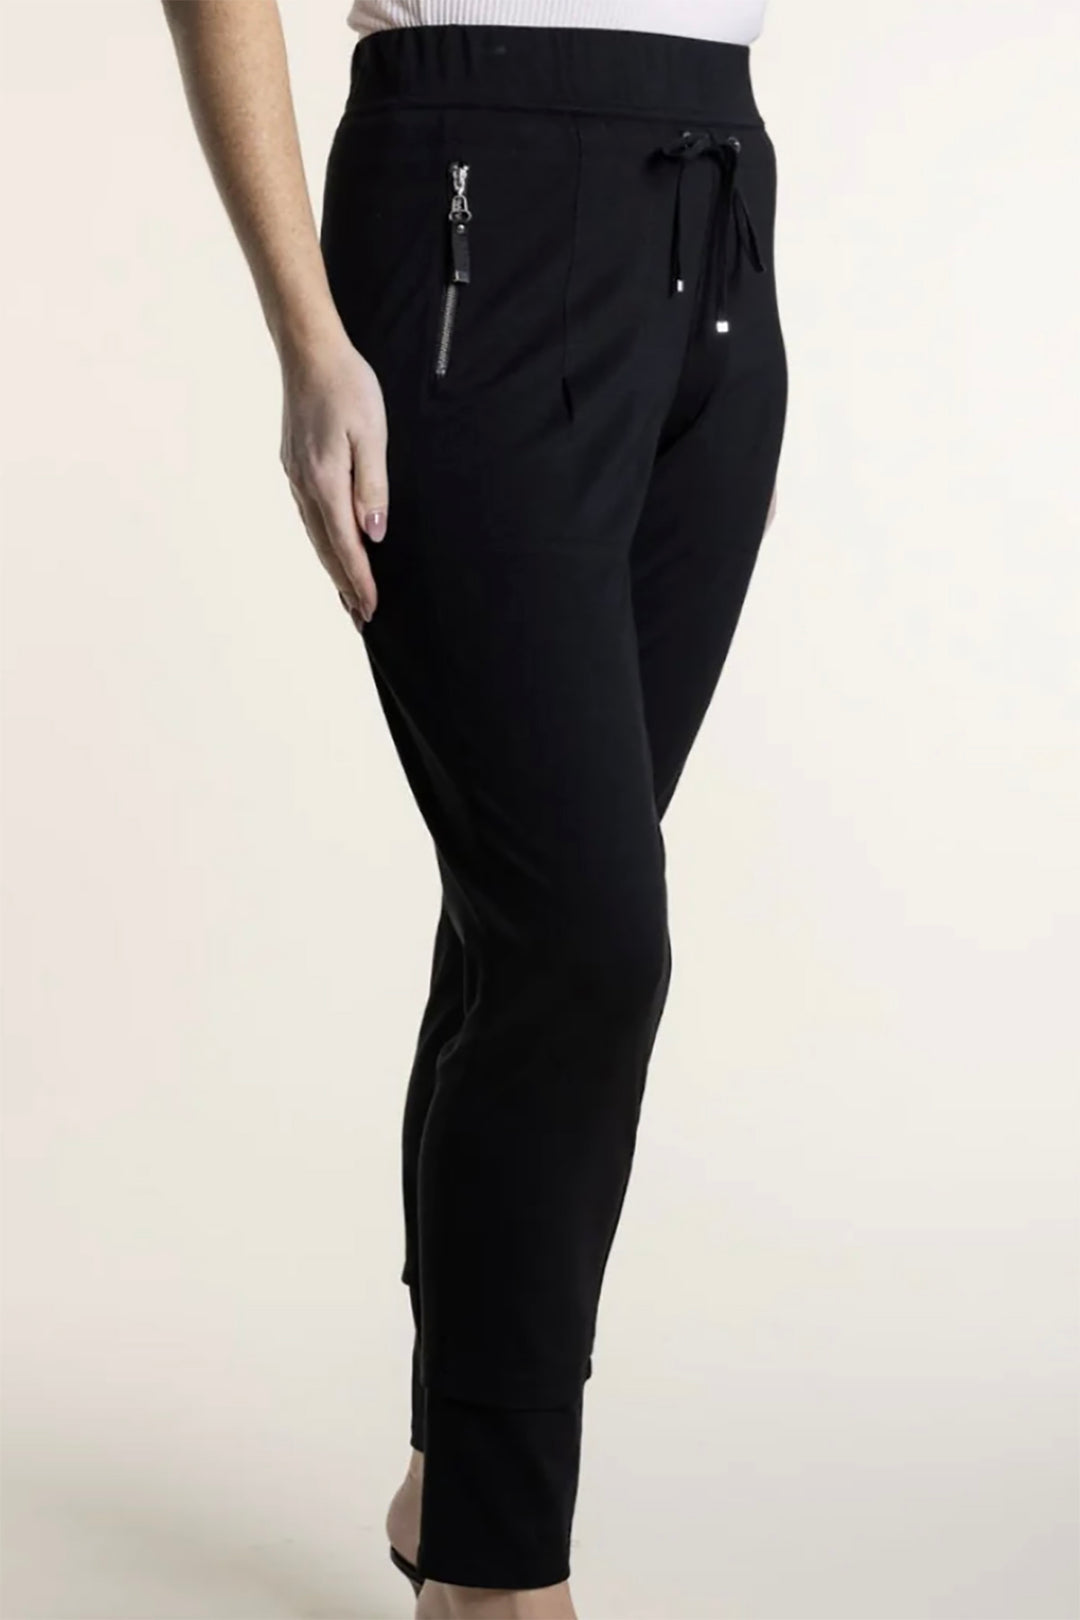 Brave + True - Elevate Pants in Natural - Womens Clothing - Black